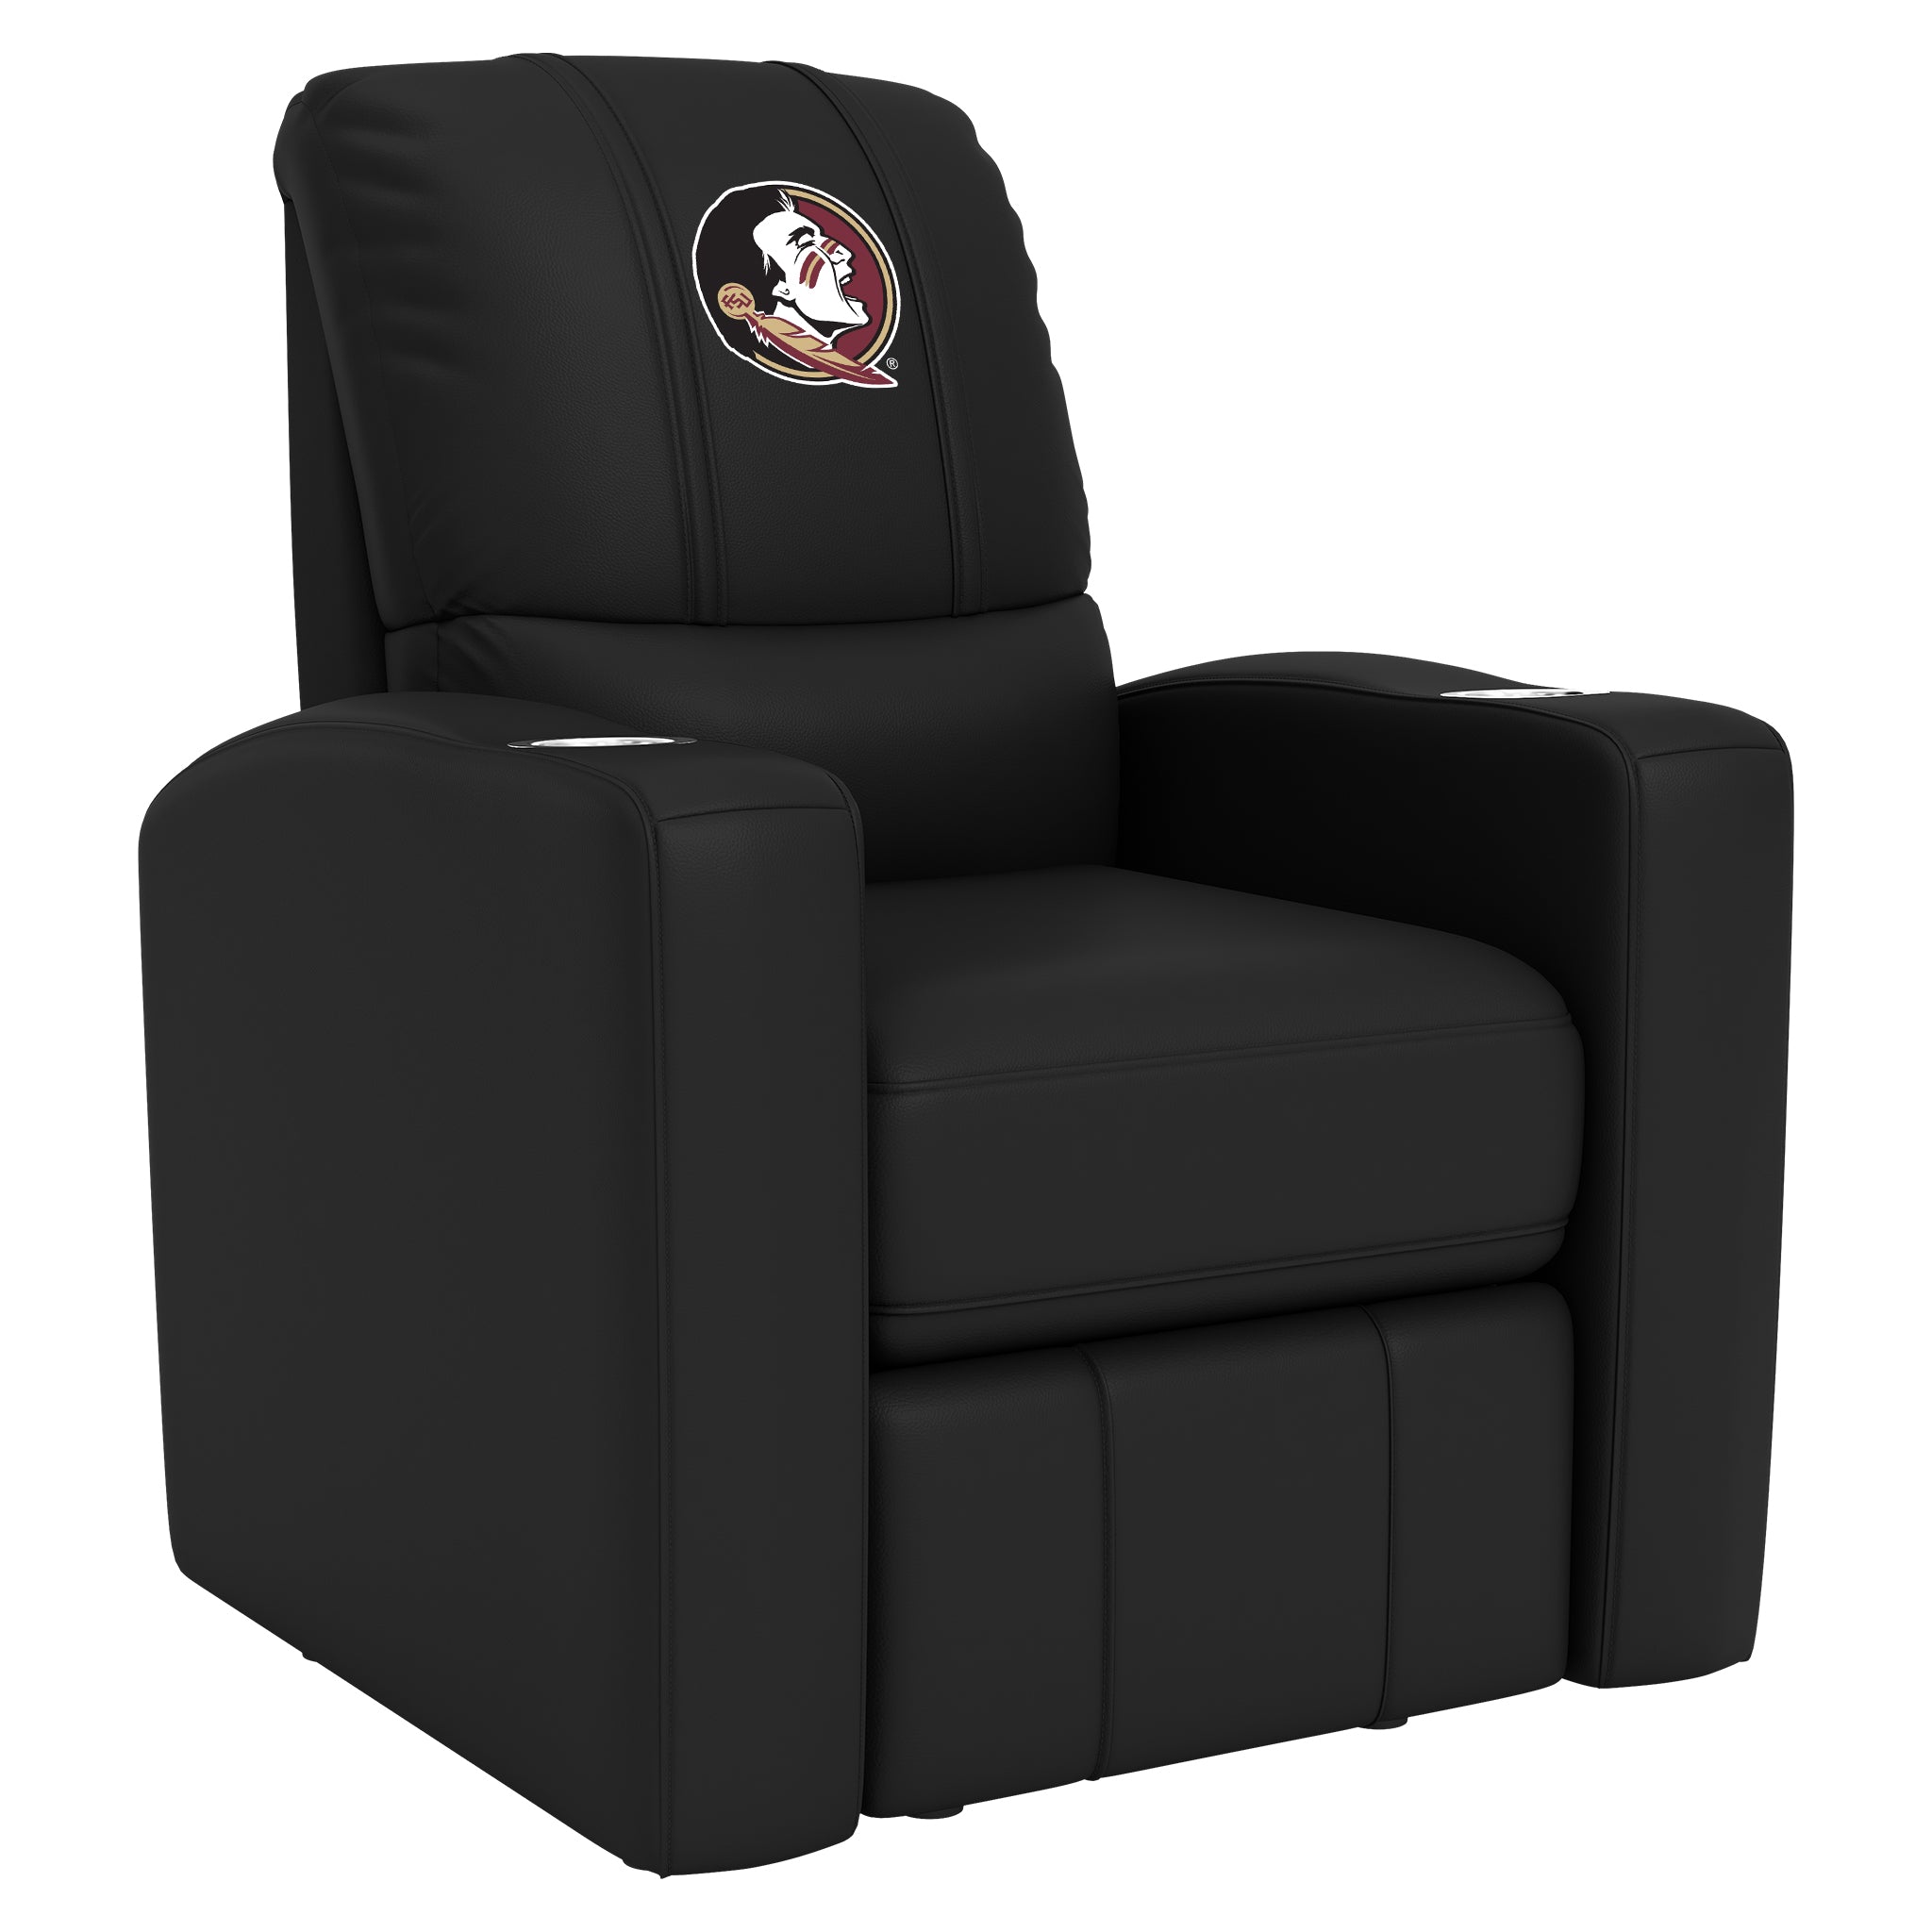 Florida State Seminoles Stealth Recliner with Florida State Seminoles Logo Panel